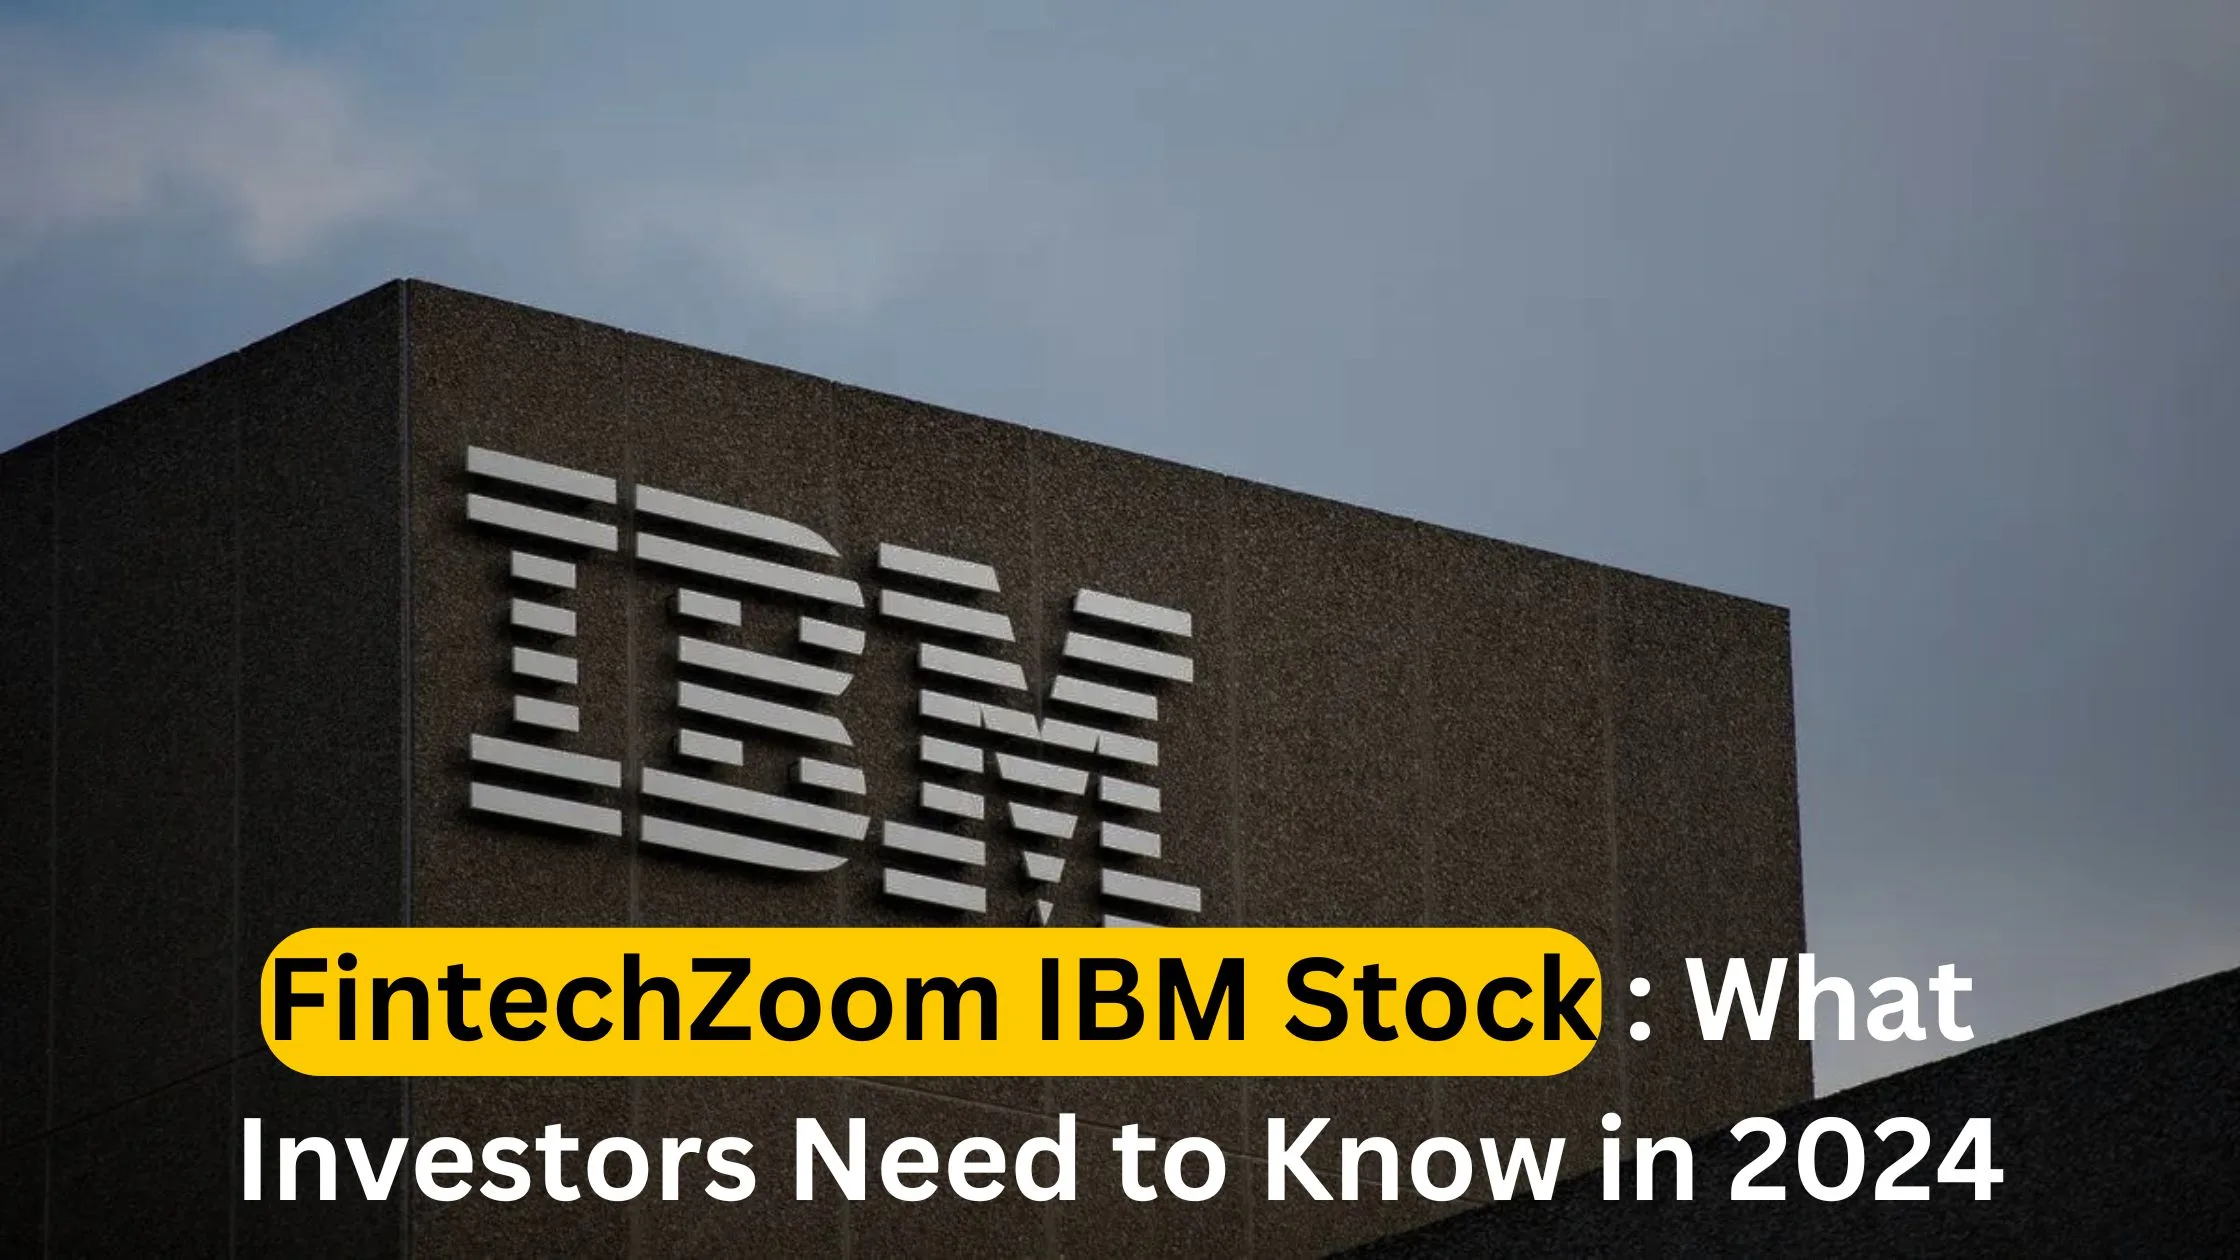 FintechZoom IBM Stock: What Investors Need to Know in 2024